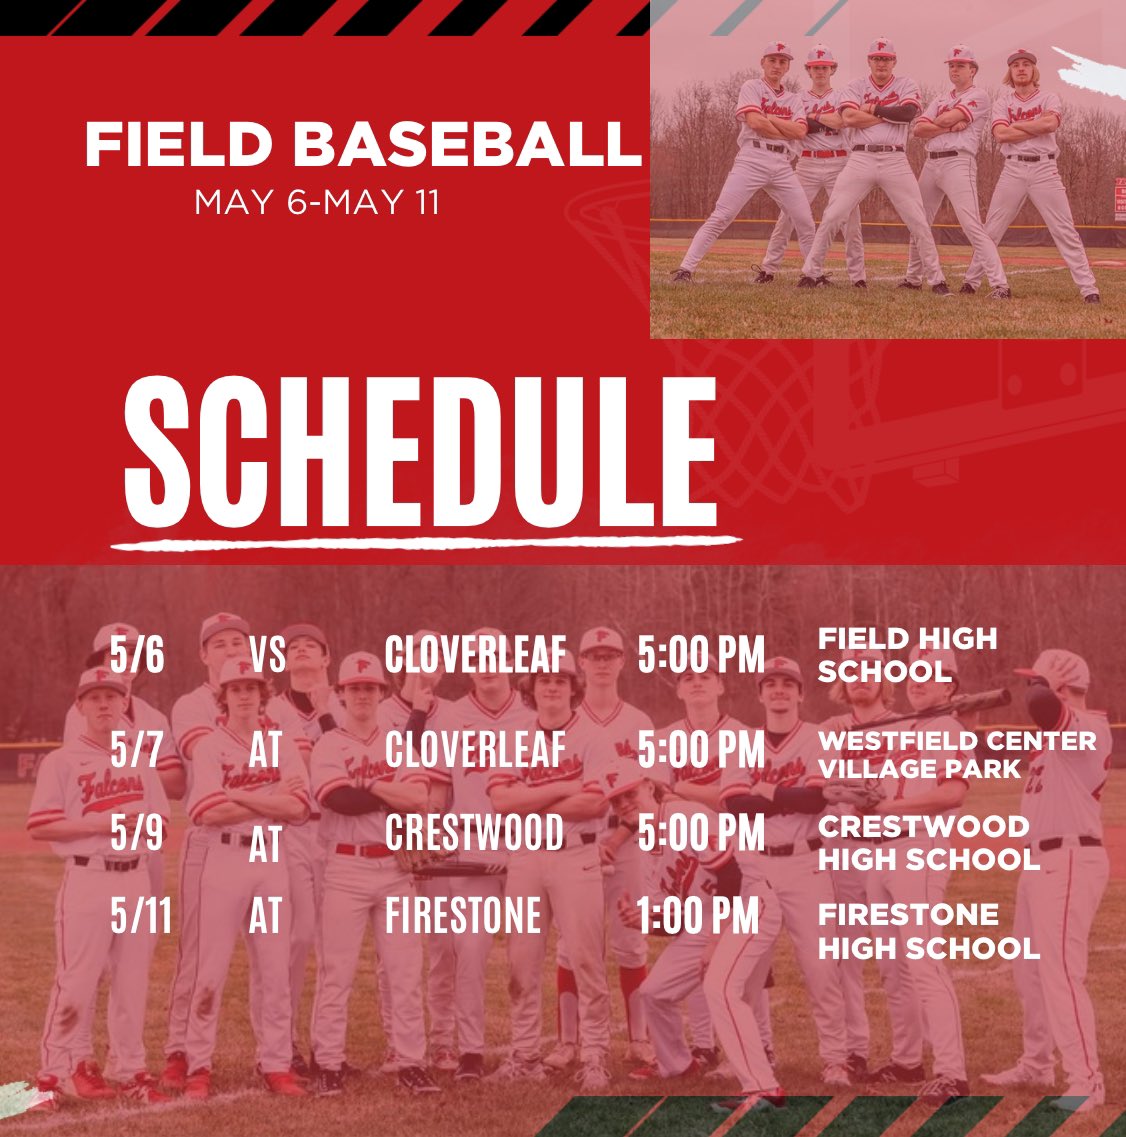 A big week ahead for the Falcons, as we finish up our conference play against @CloverleafBase. We also head to @CwoodBaseball and @stone_baseball for some non-conference action. #WBM